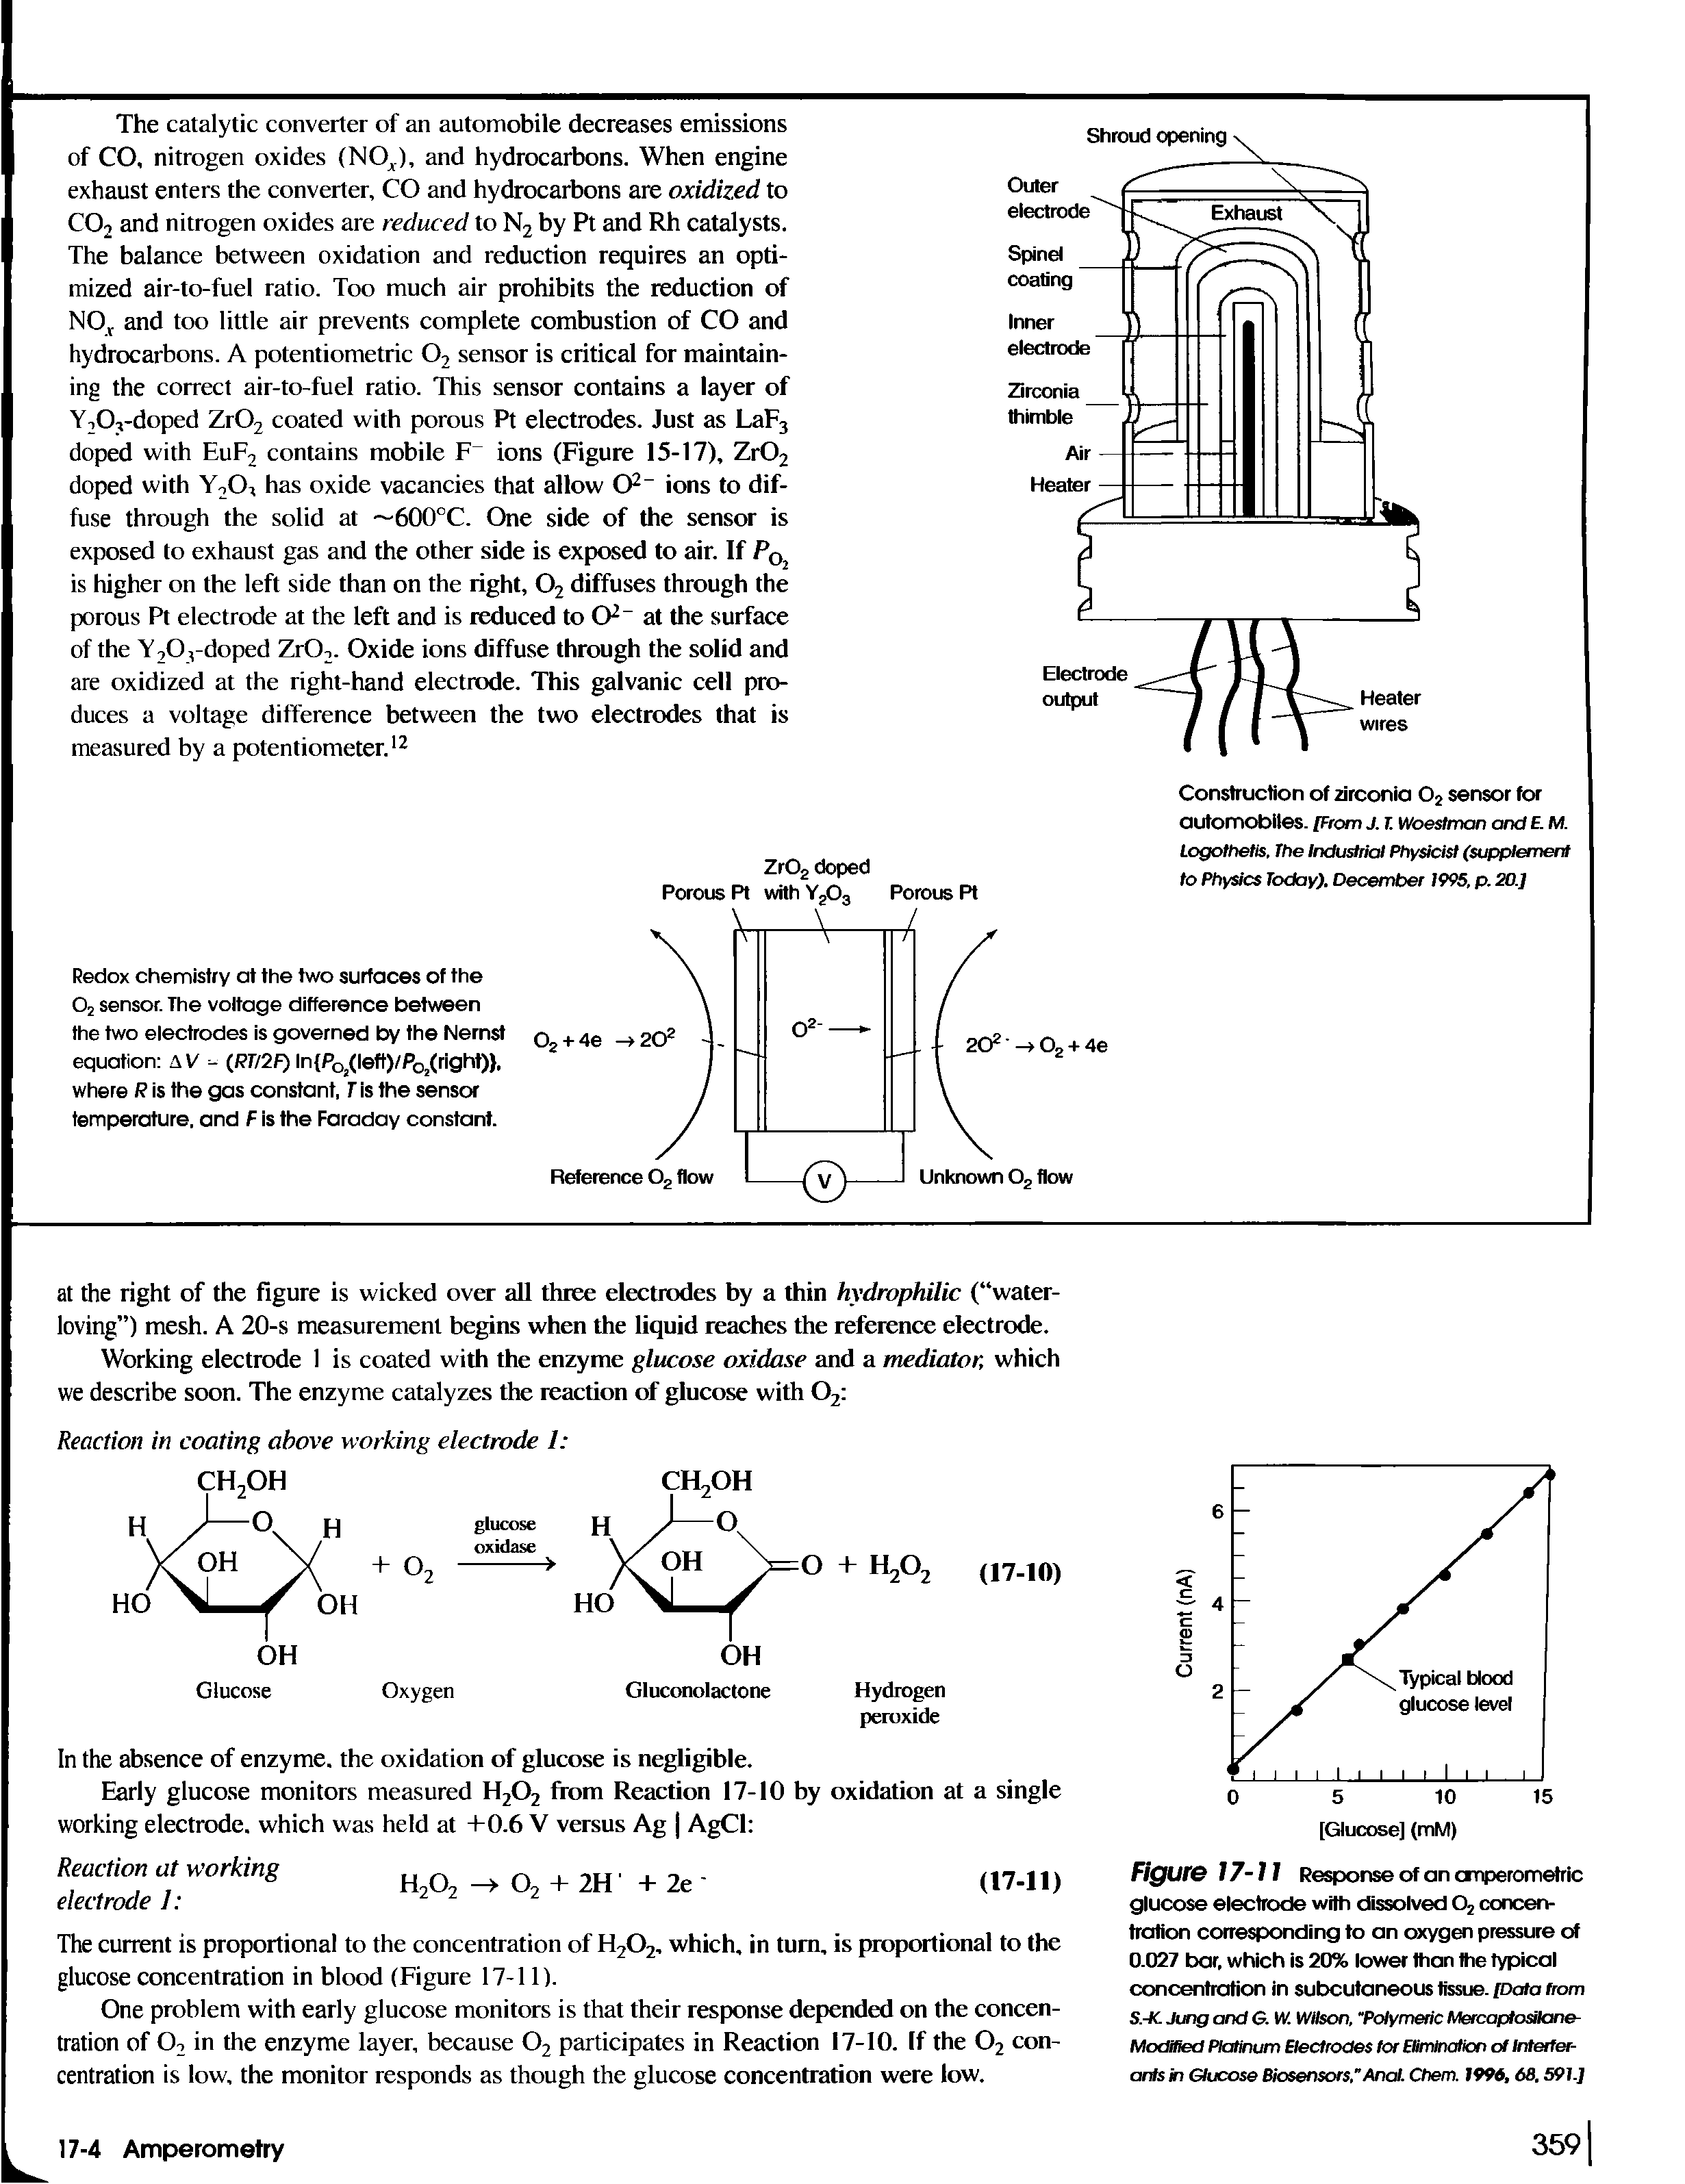 Figure 17-11 Response of an cmperometric glucose electrode with dissolved 02 concentration corresponding to an oxygen pressure of 0.027 bar, which is 20% lower than the typical concentration in subcutaneous tissue. [Data from S.-K. Jung and G. W. Wilson, "Polymeric Mercaptosilane-MocMed Platinum Electrodes lor Elimination of Interfer-ants in Glucose Biosensors," Anal. Chem. 1996,68.591.]...